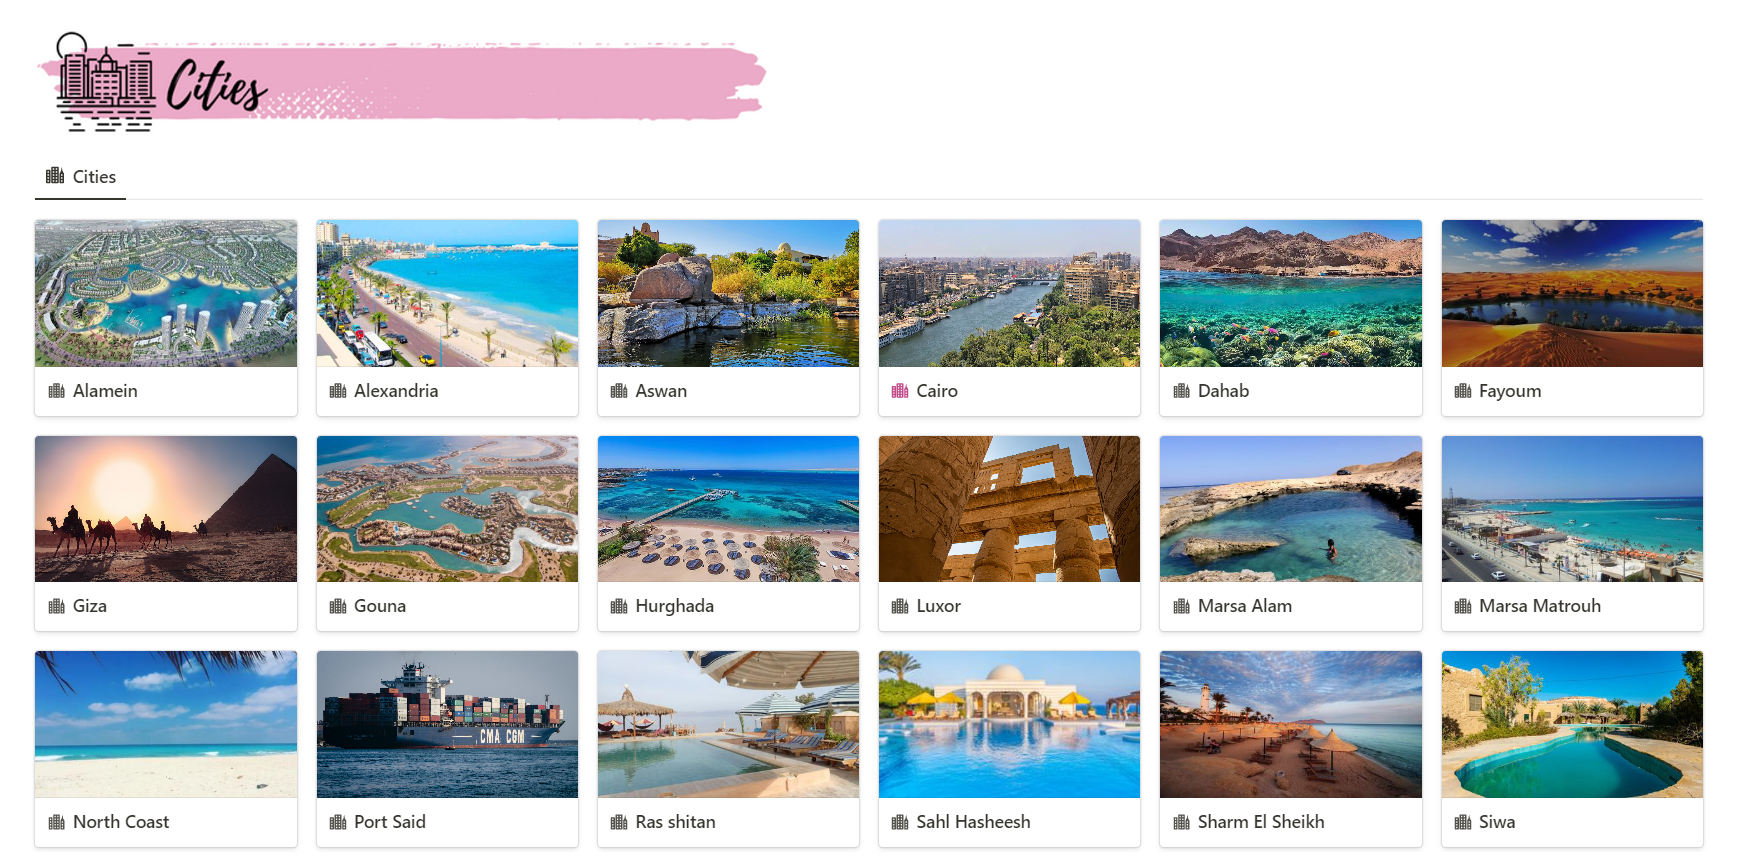 Notion Travel Planner : A gallery view of all the cities in the country